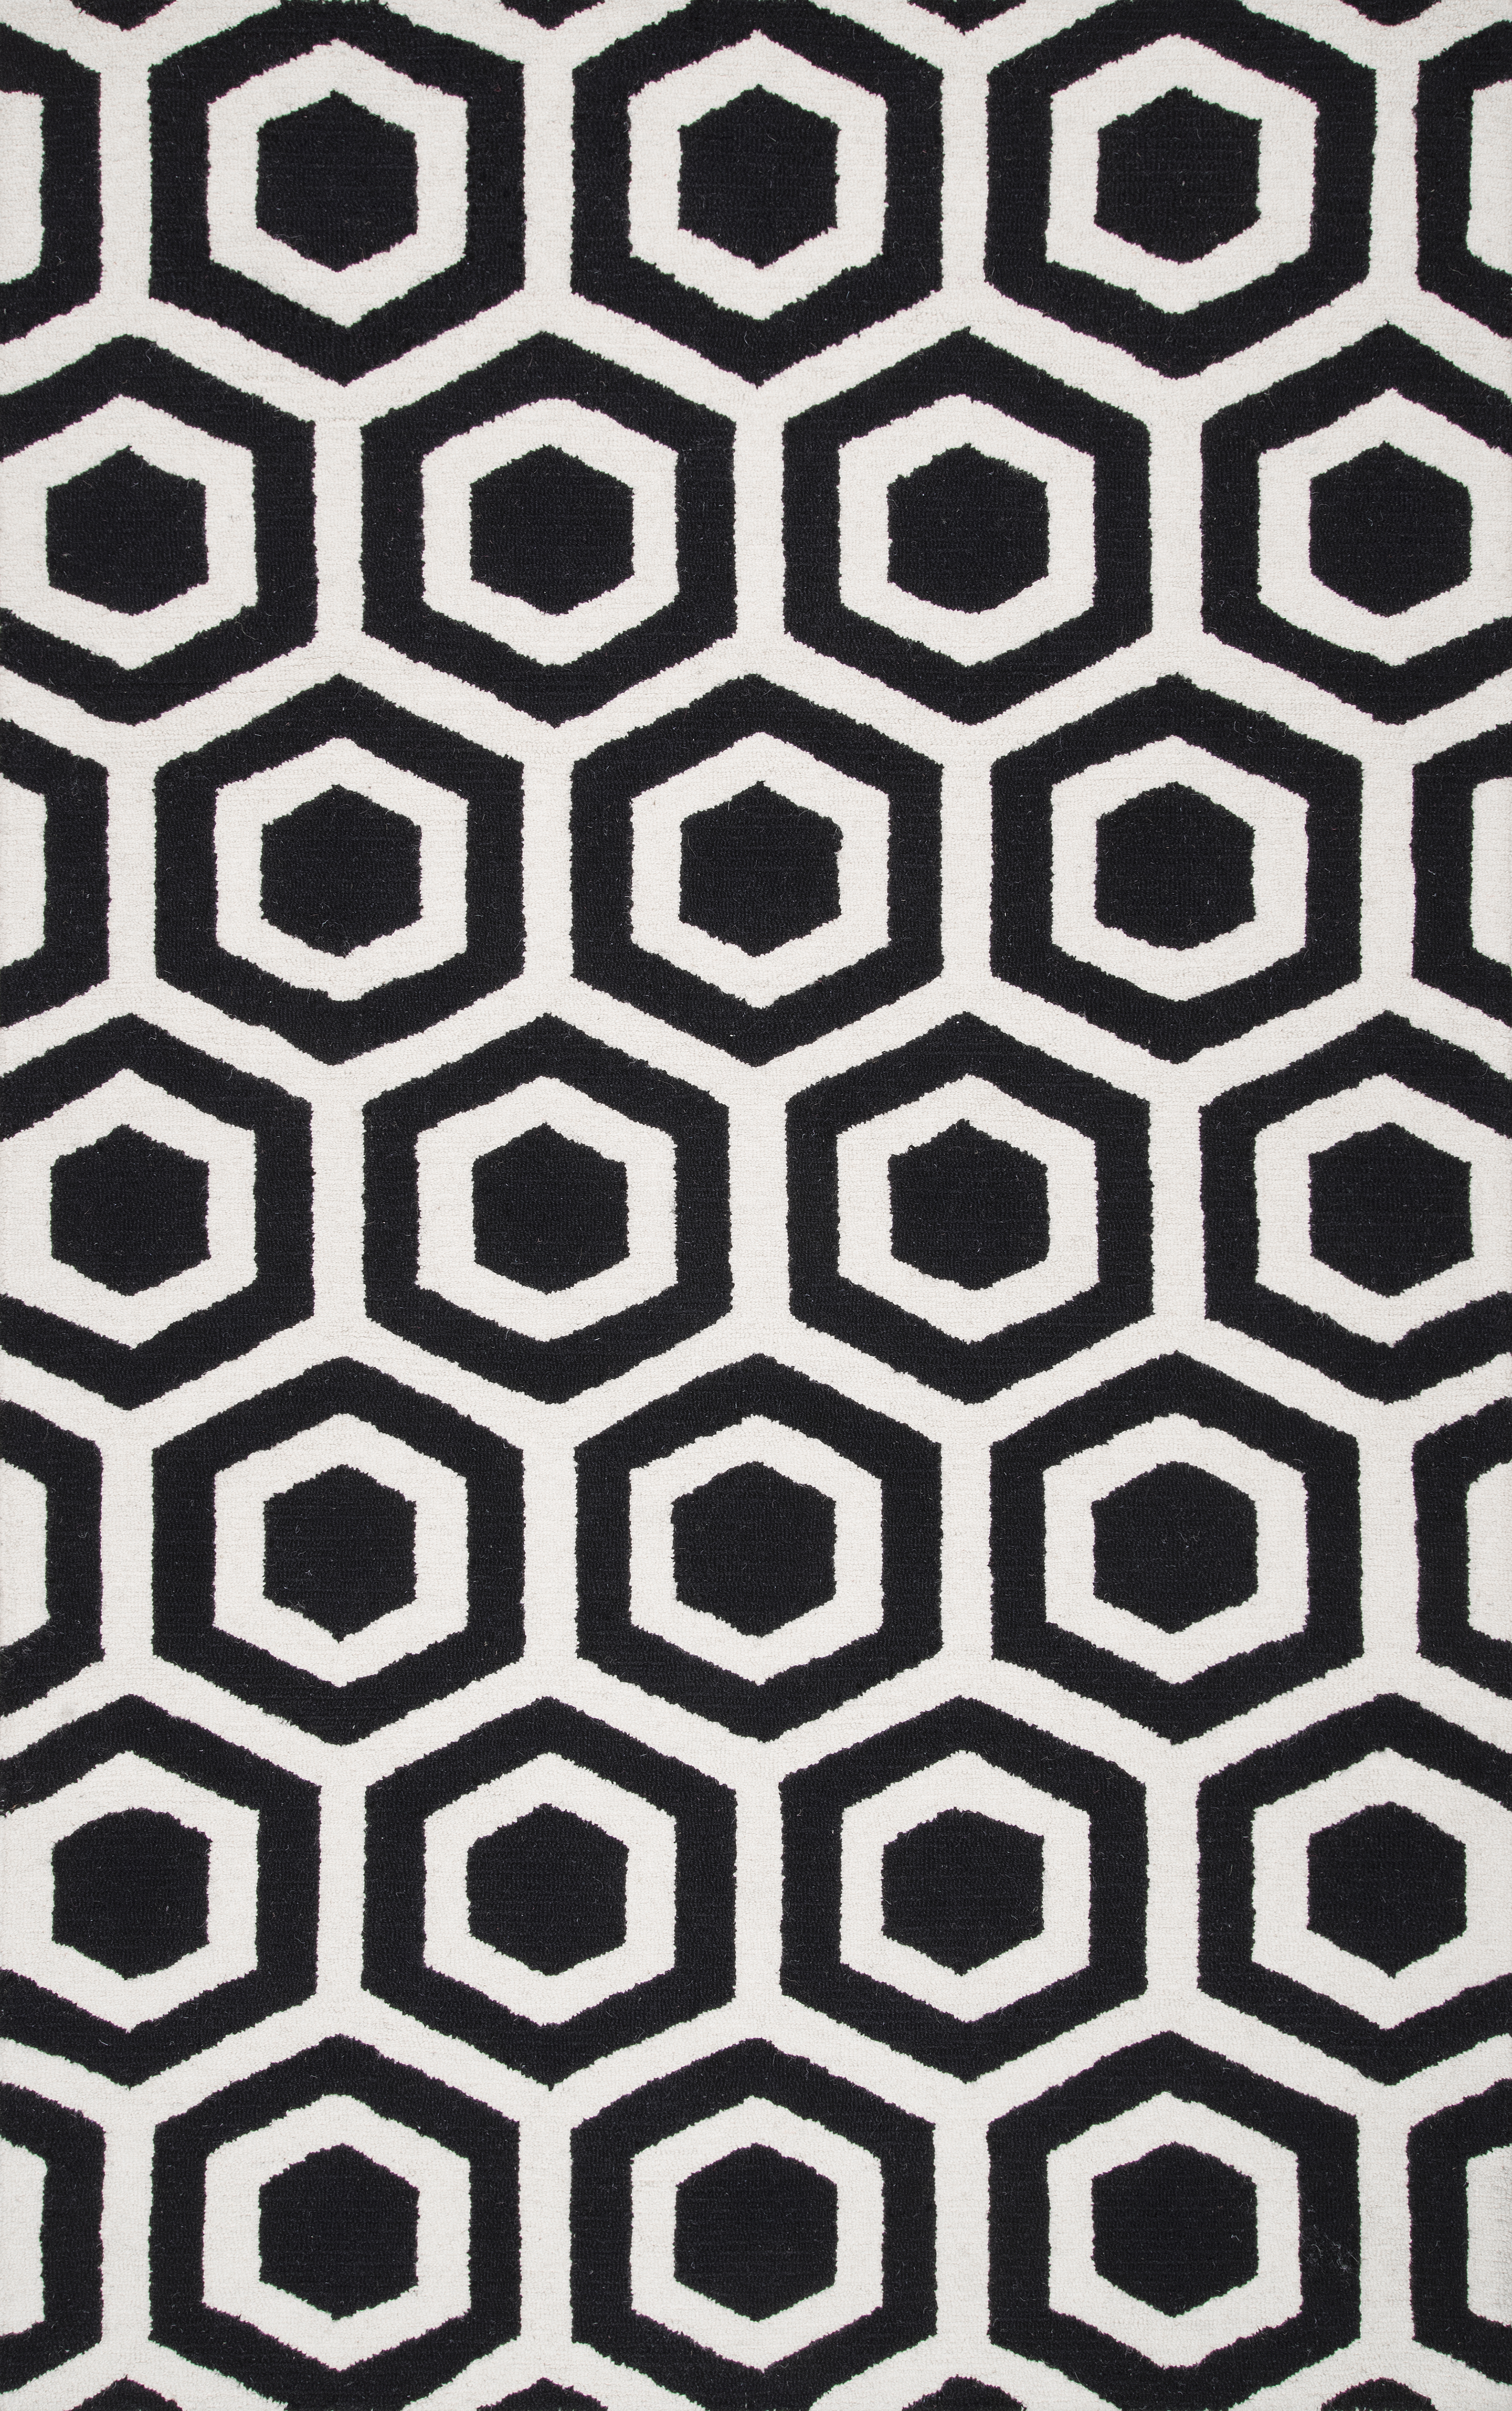 black and white patterned rug